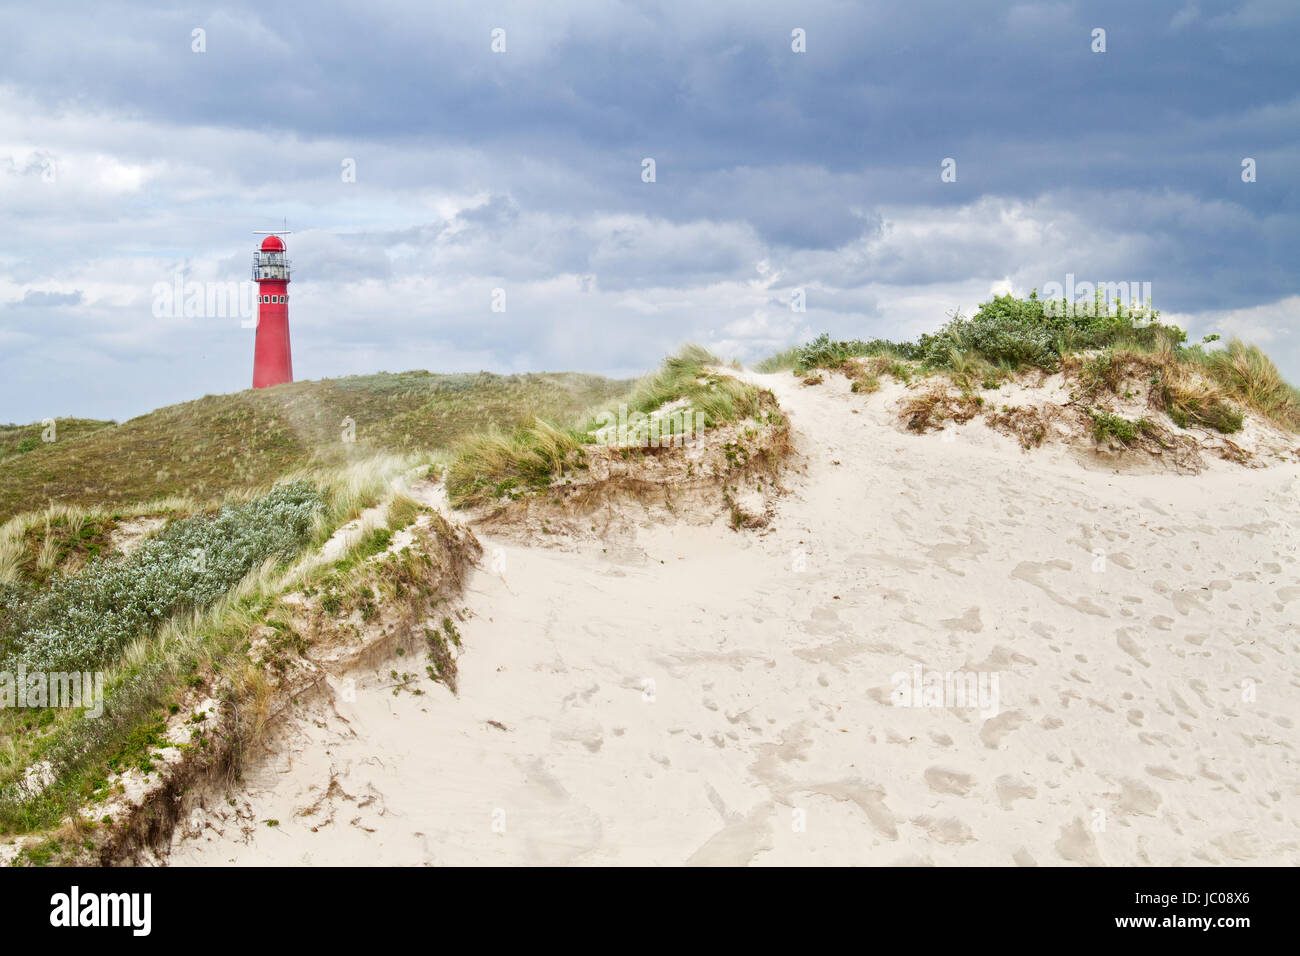 Red lighthouse in the dunes on a windy day, sand blowing in the air Stock Photo